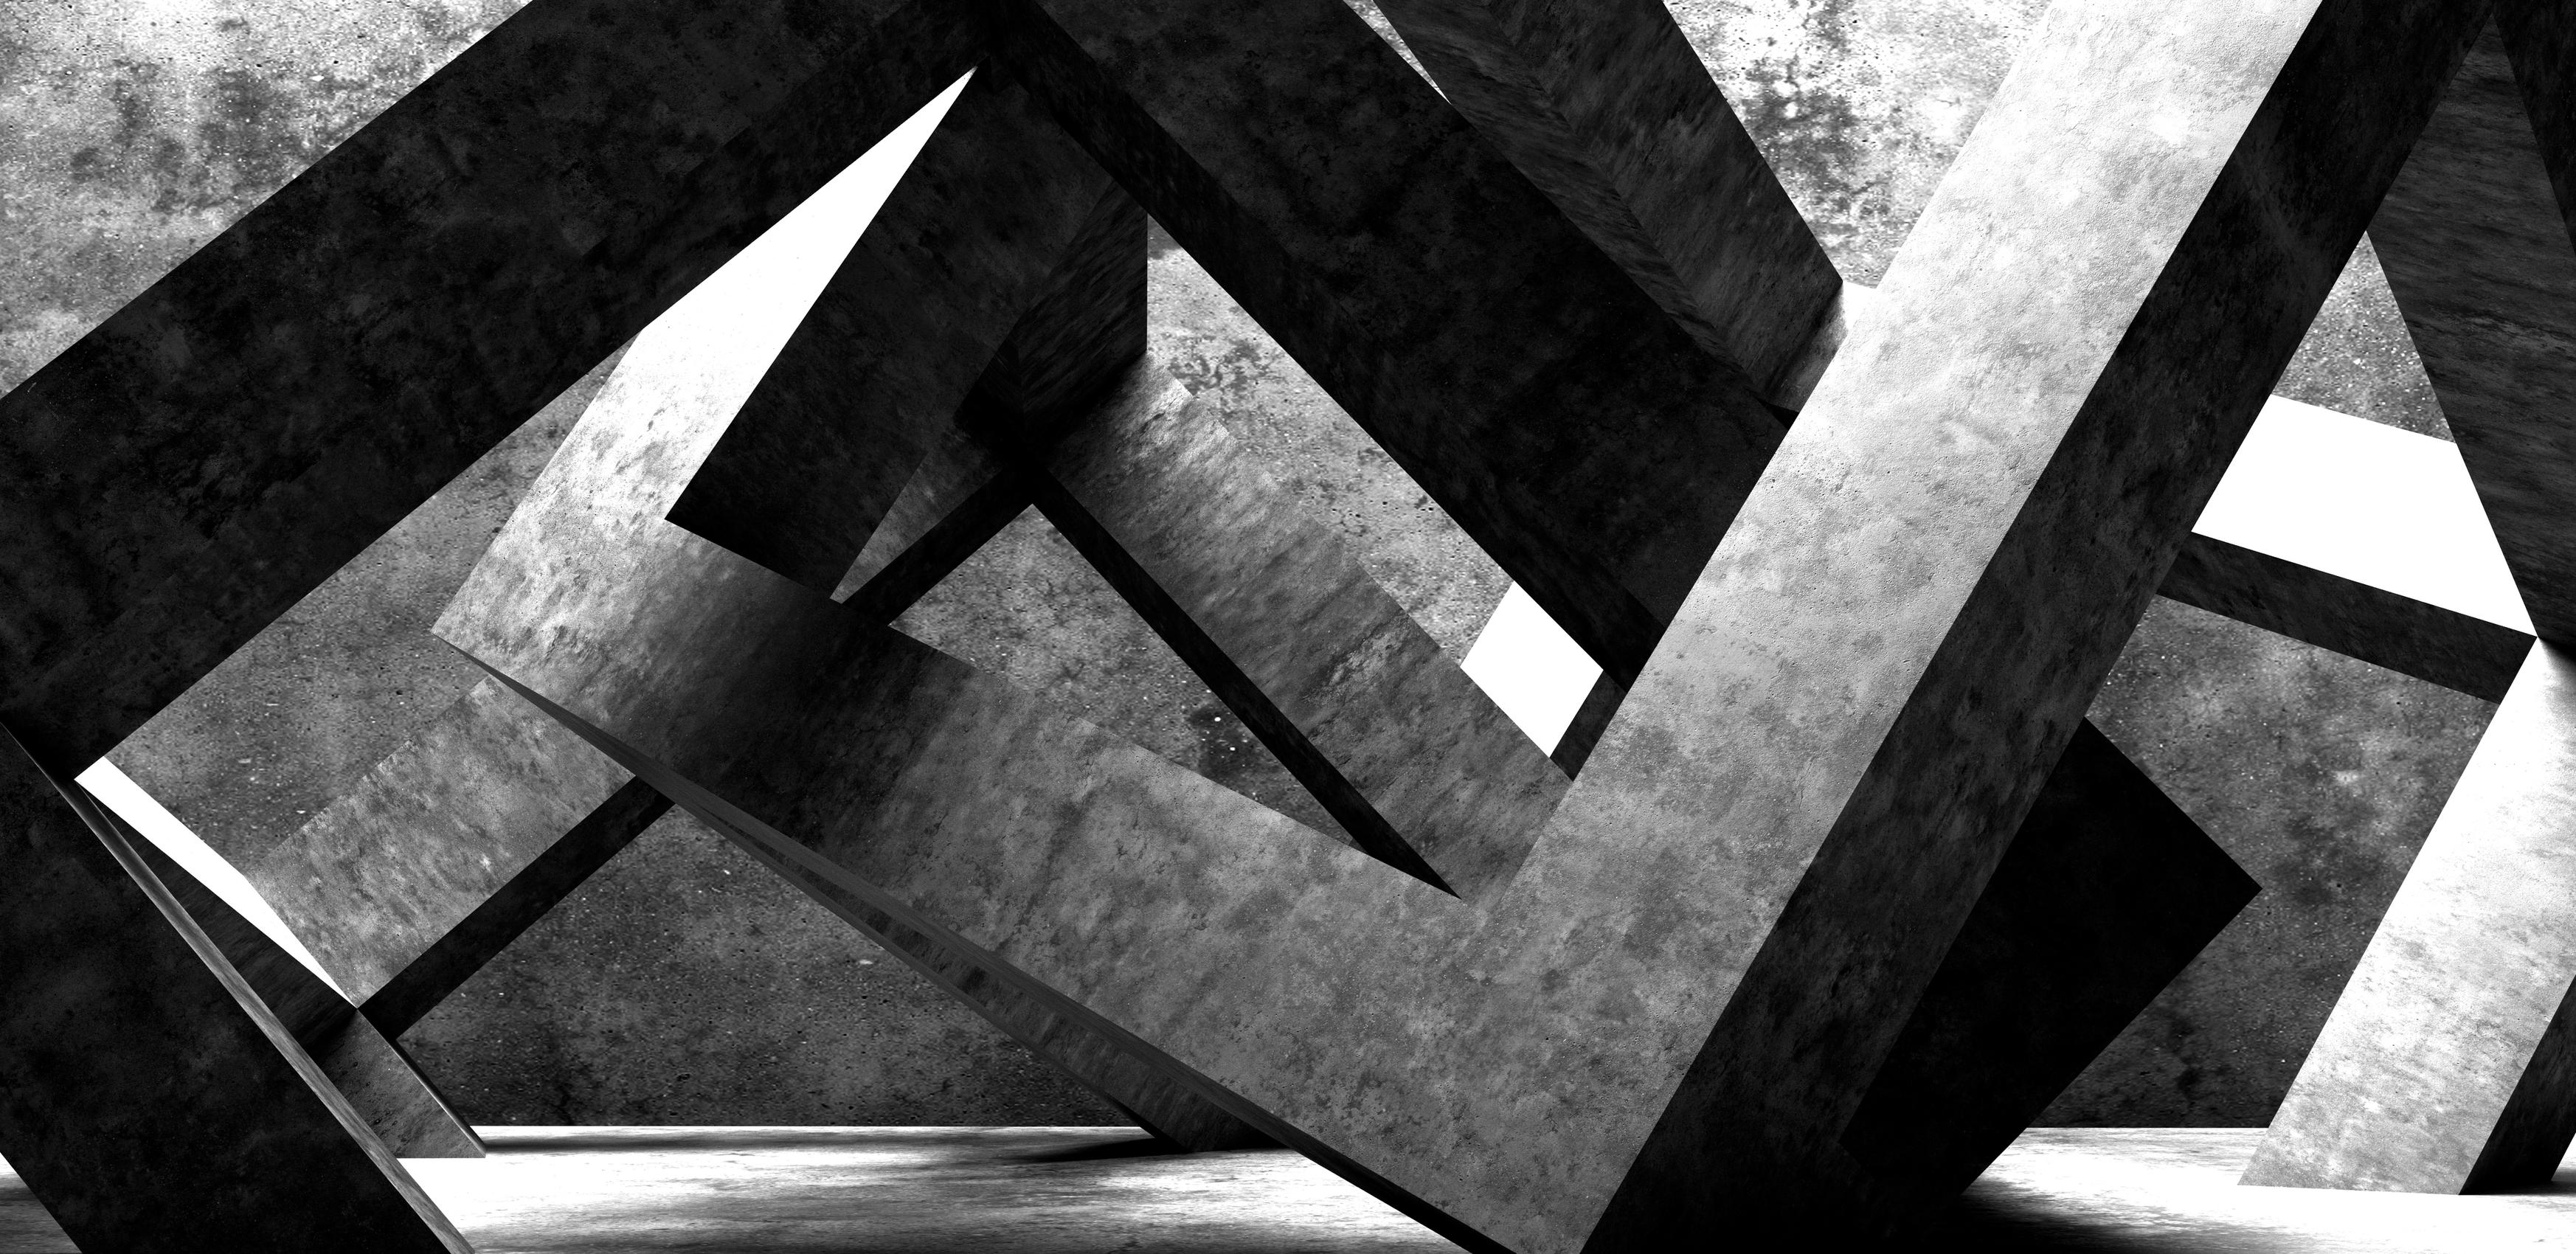 Abstract square shape architecture.